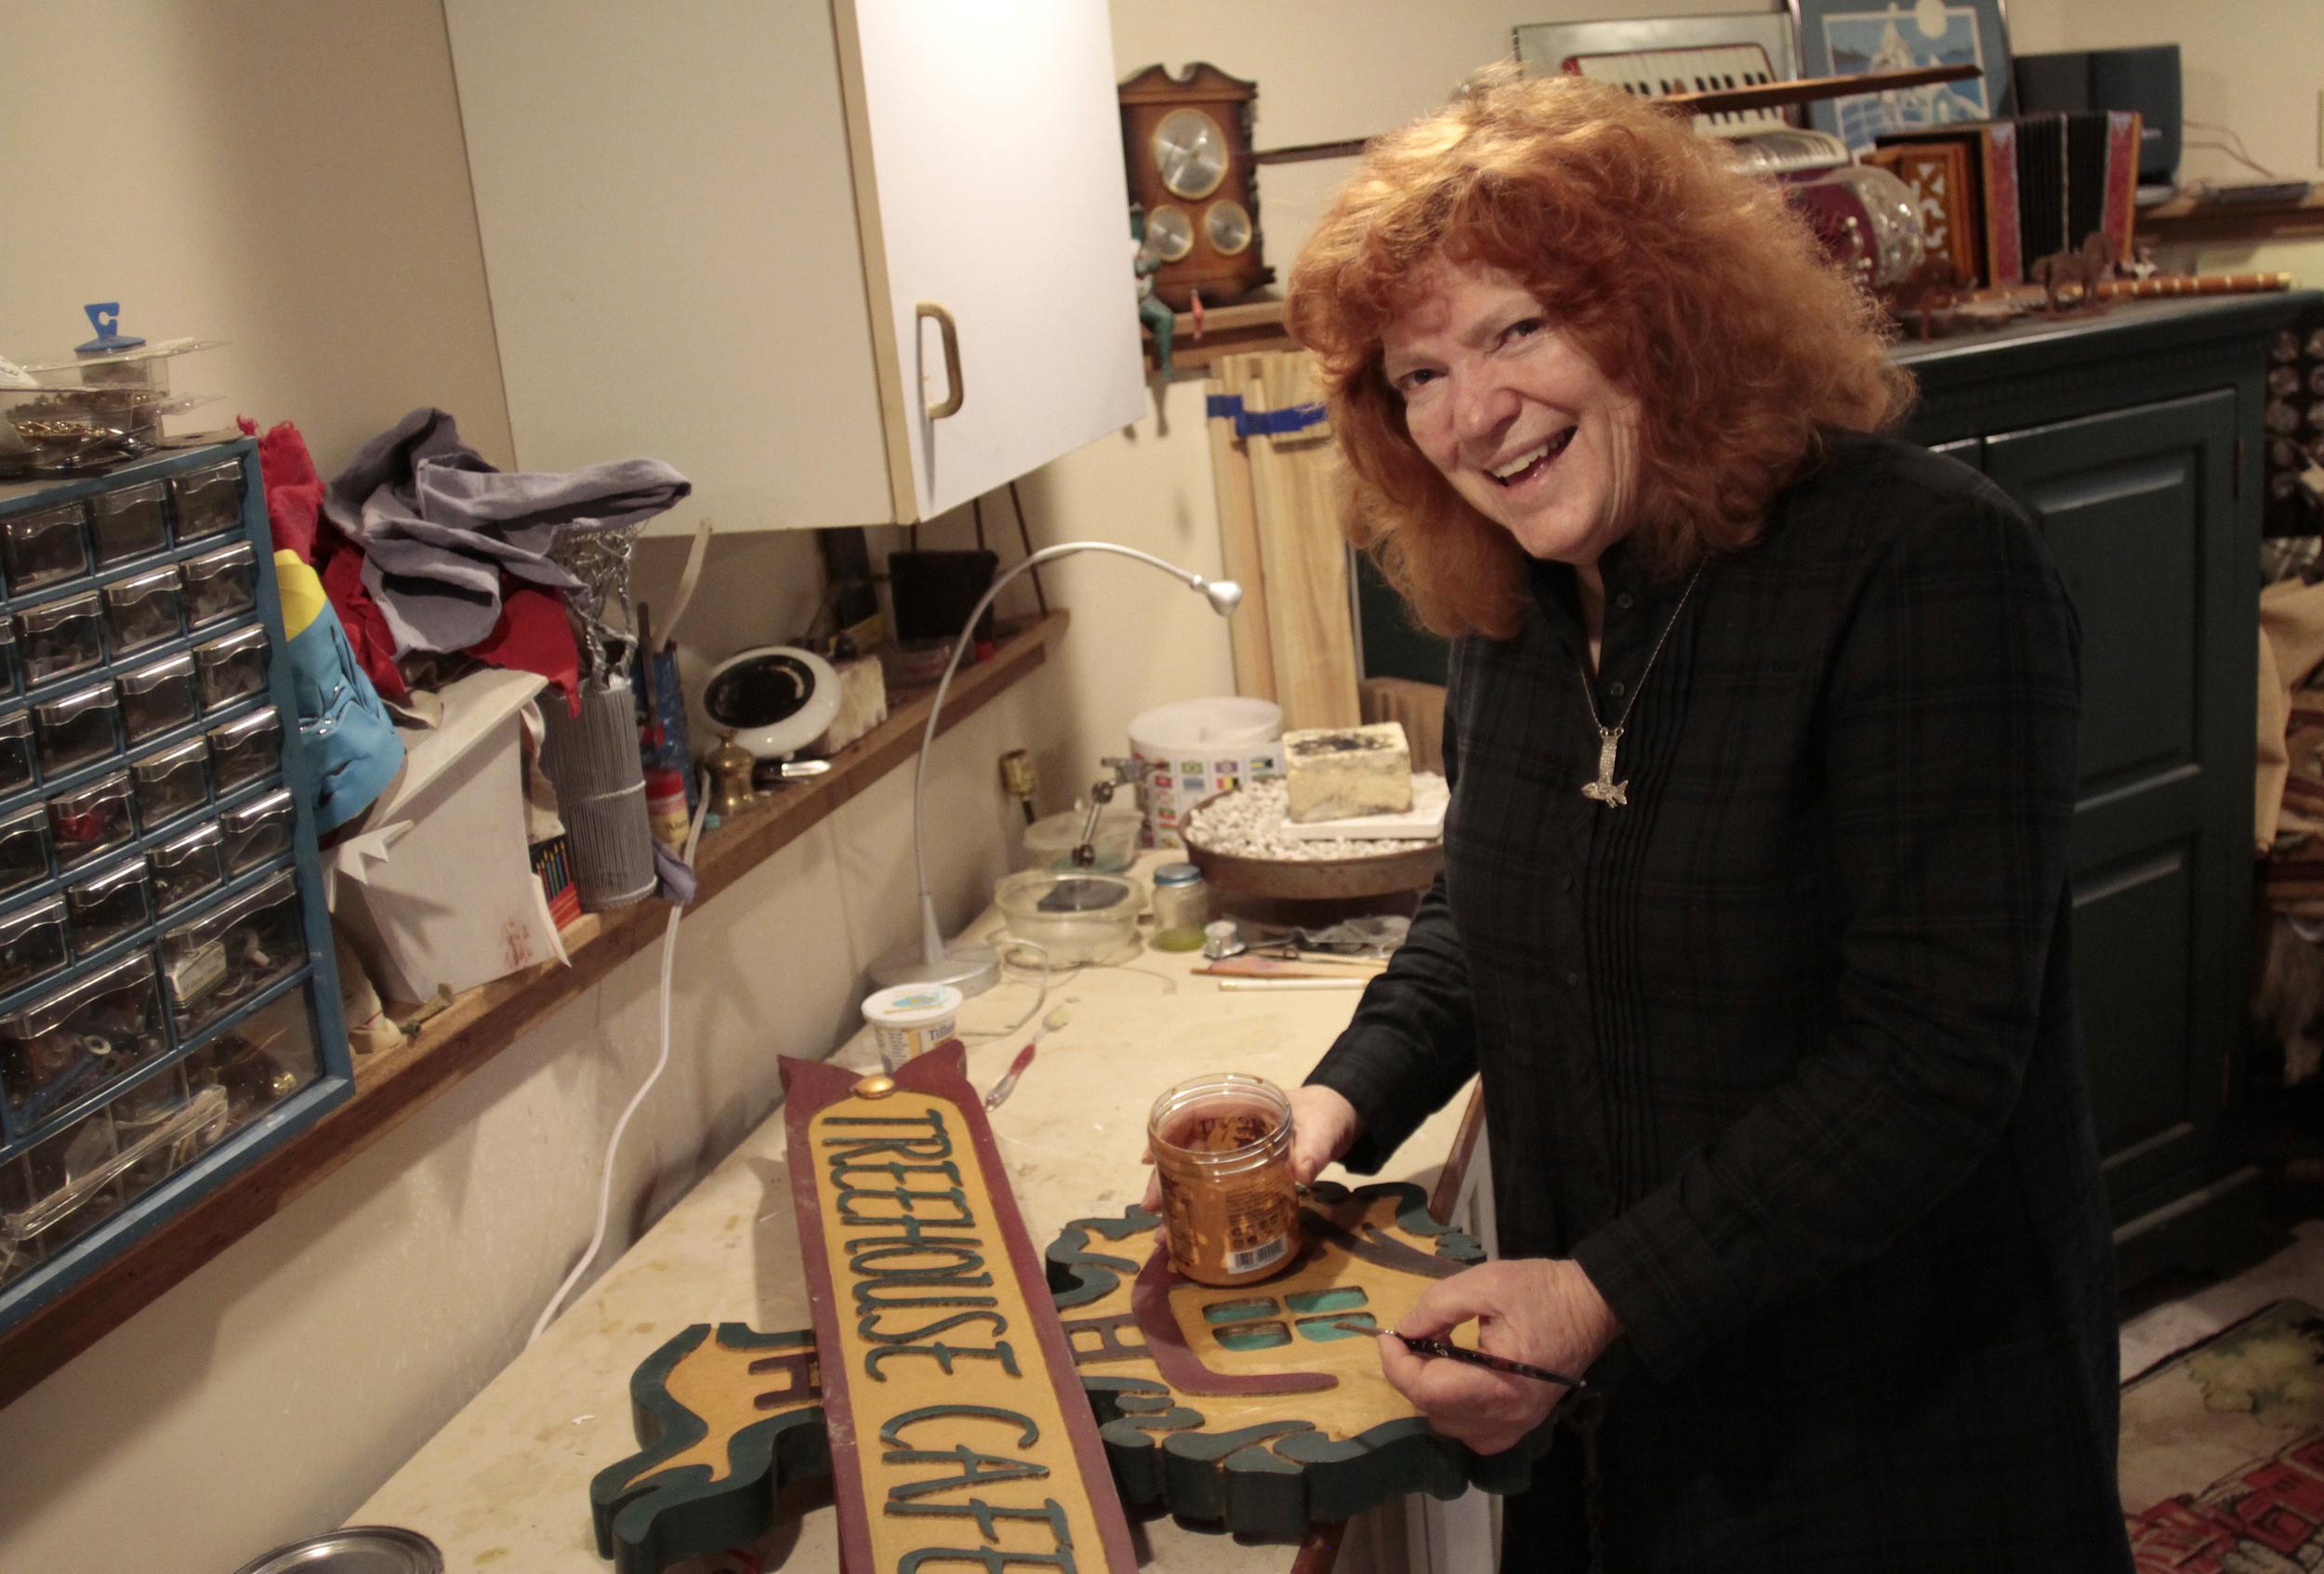  2016 Island Treasure Award recipient Denise Harris in her home studio on Bainbridge Island, Washington. Harris has been a regular Bainbridge Performing Arts contributor both on stage and behind the scenes for more than 30 years. She has also designe